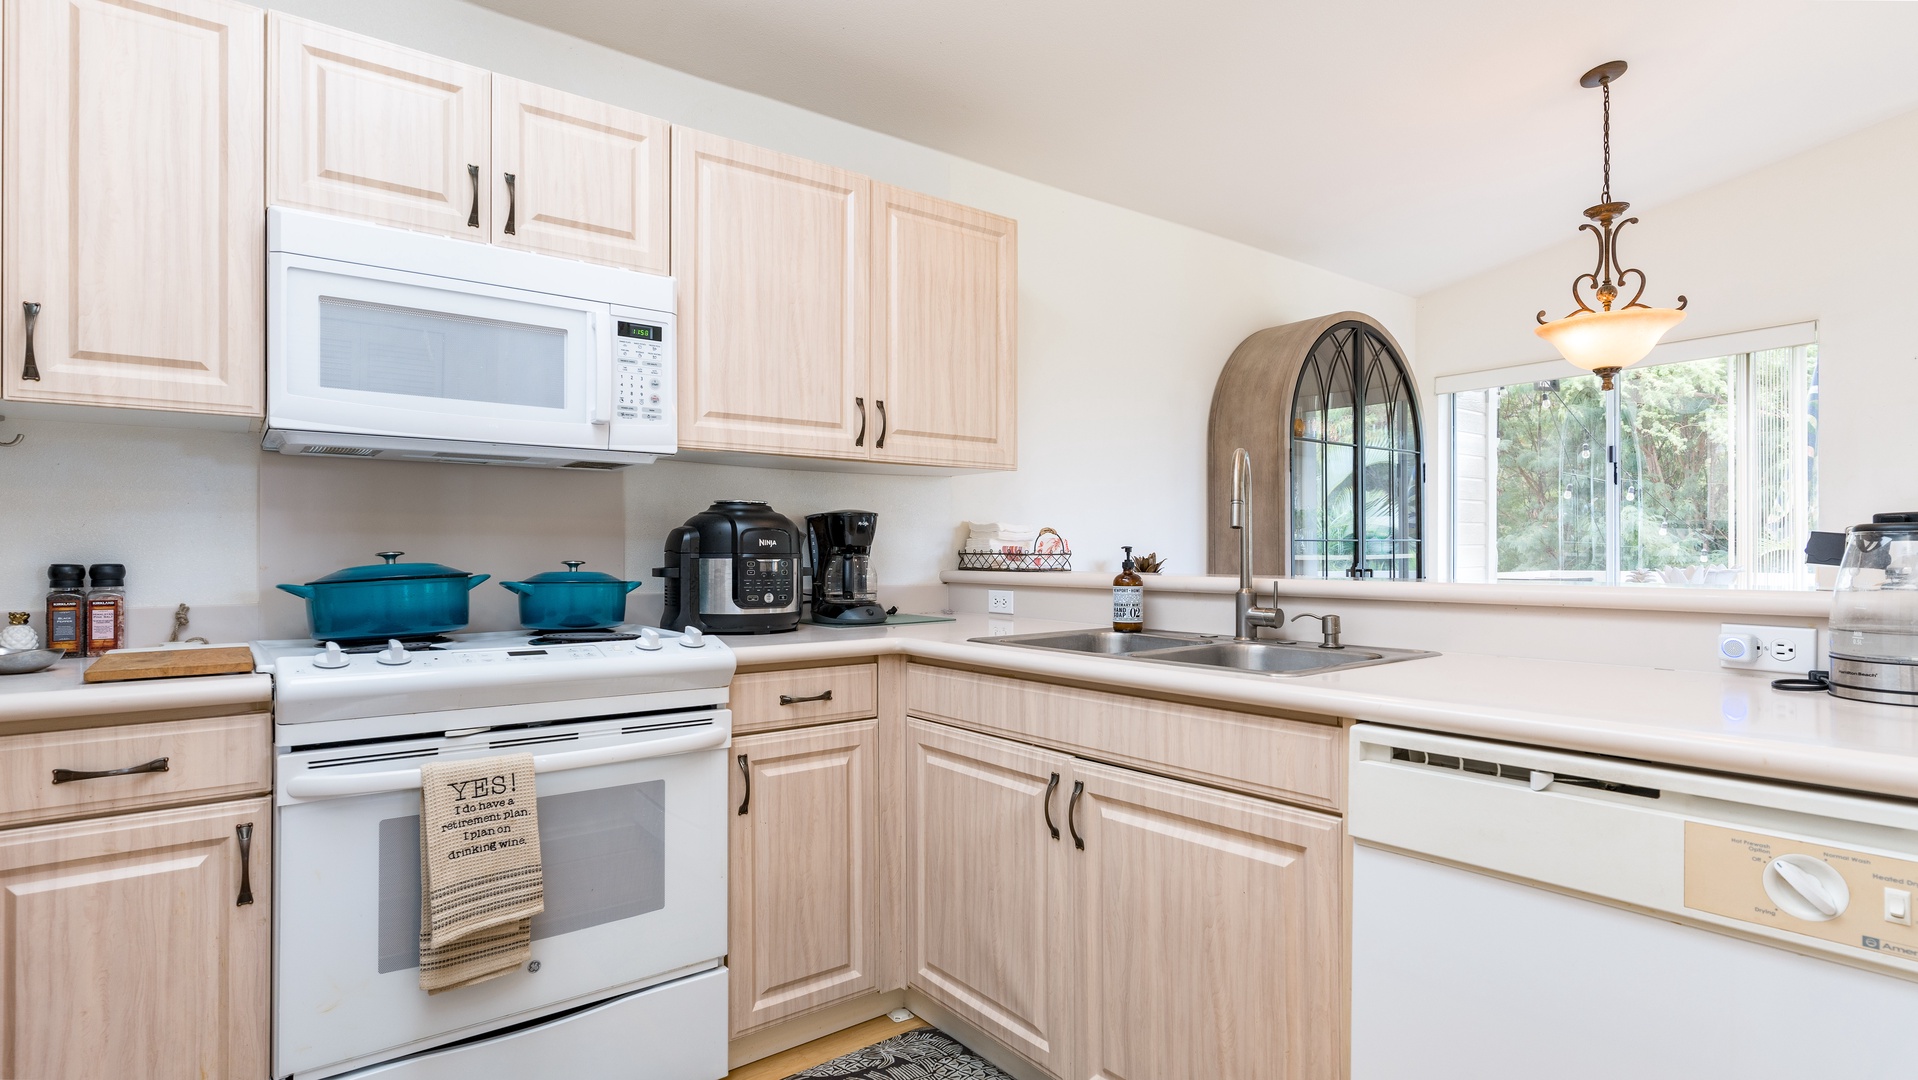 Kapolei Vacation Rentals, Fairways at Ko Olina 4A - The bright kitchen features many amenities including a fridge, oven, extended counter-tops and high ceilings.